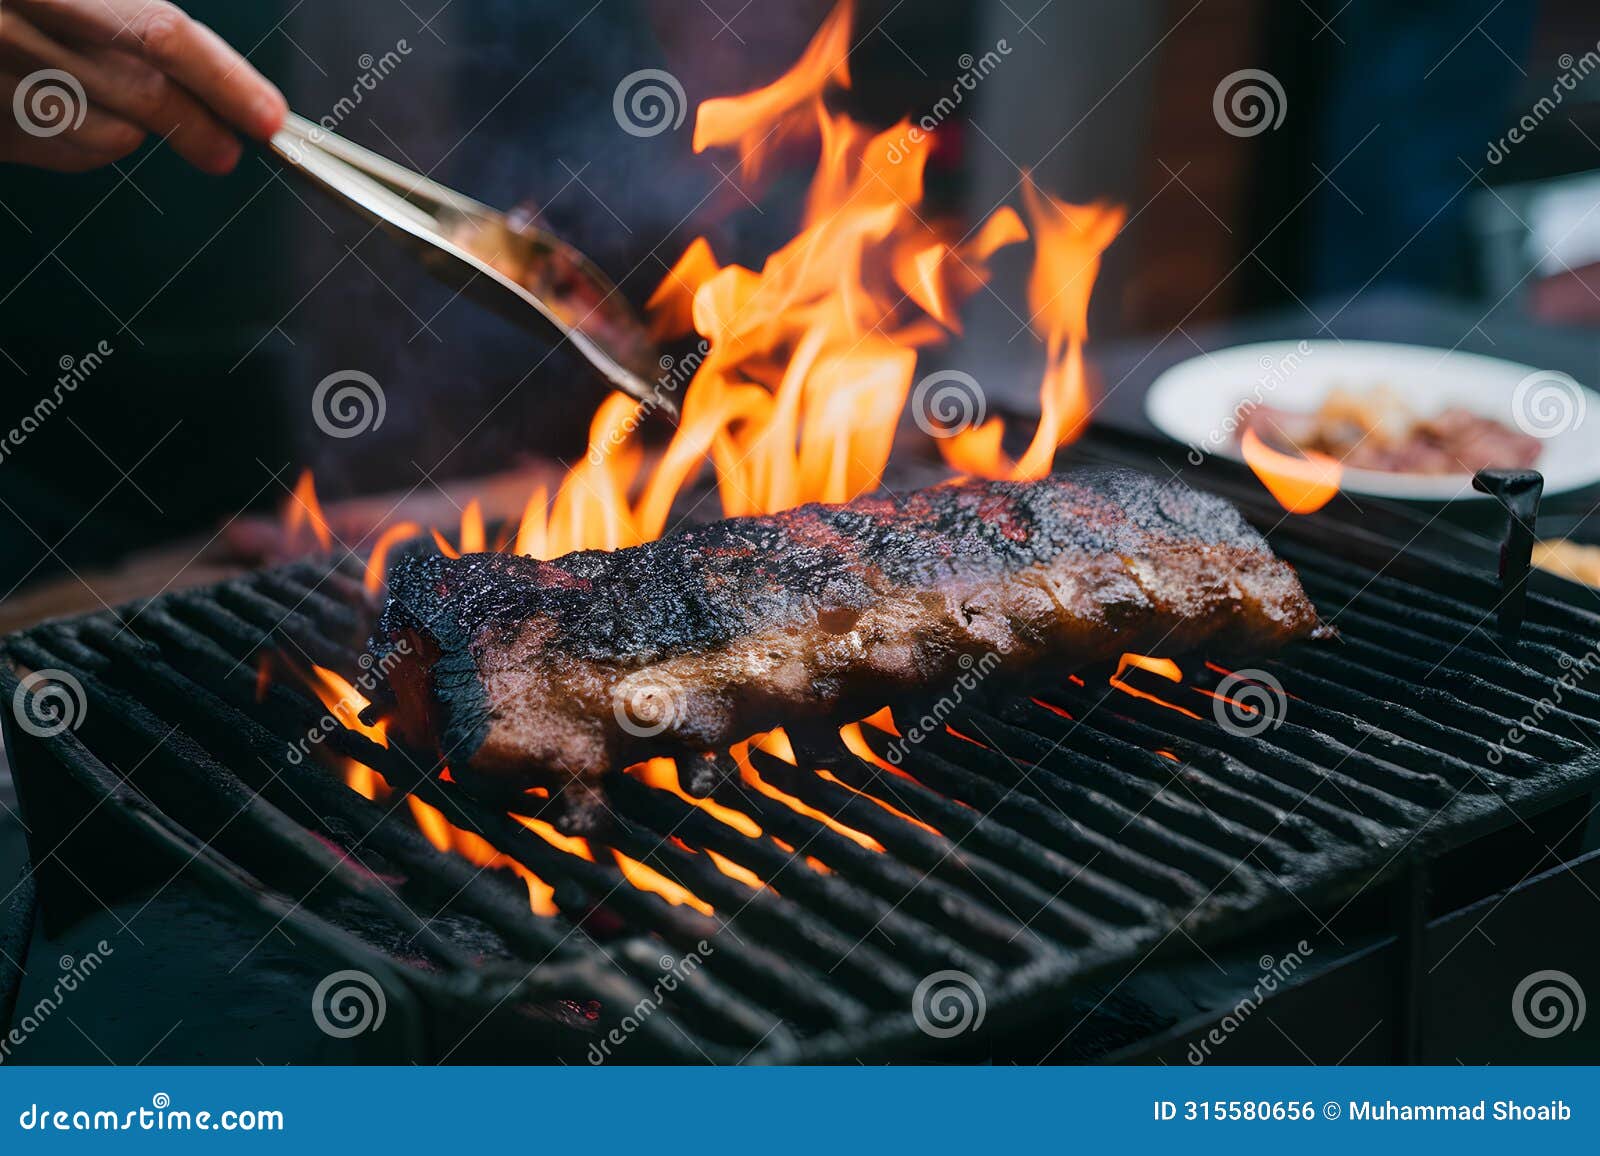 fried pork ribs grilling on open flame, flavorful street food